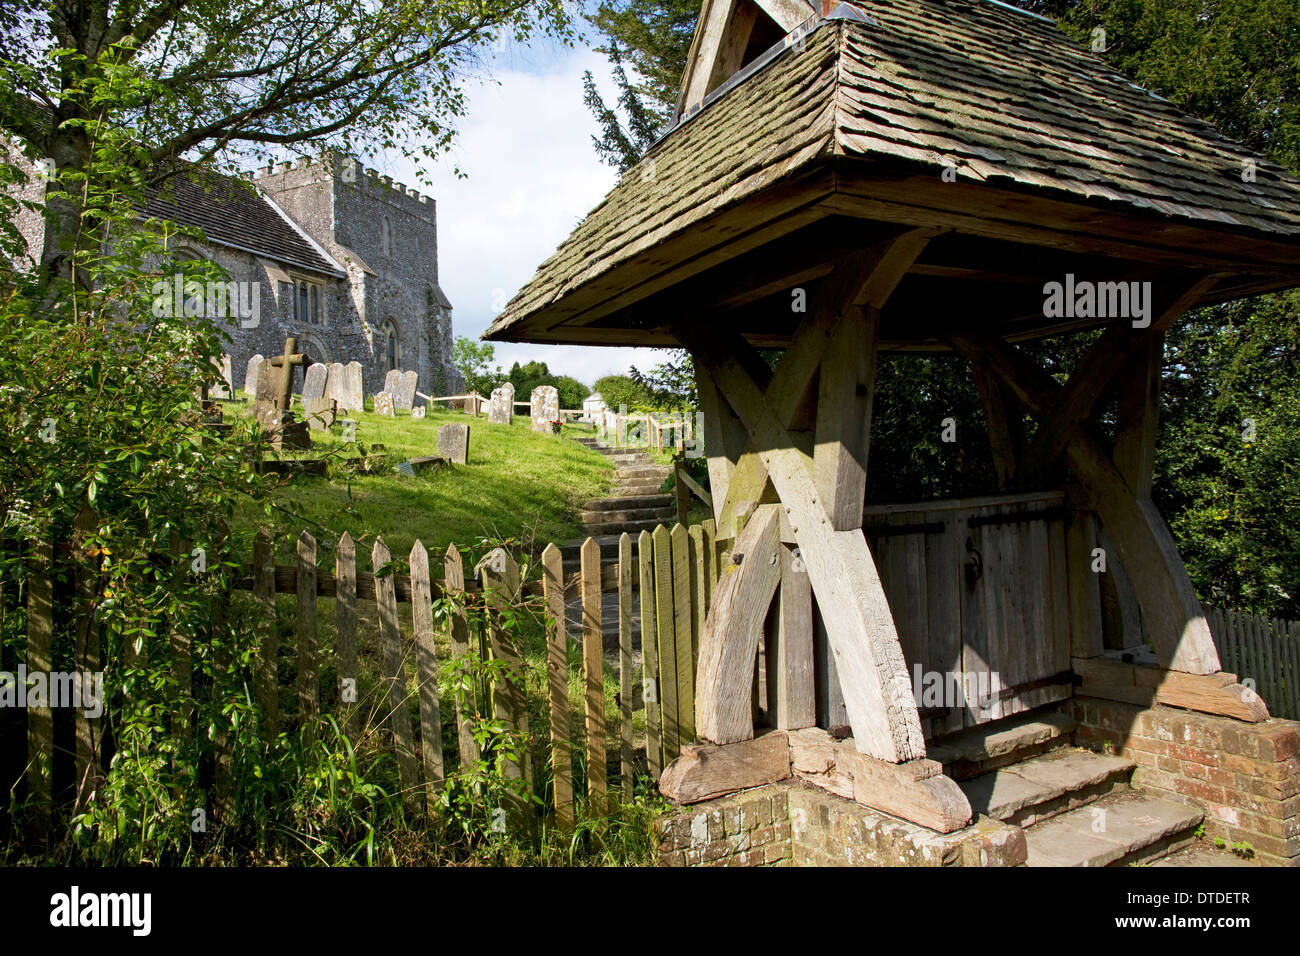 St Nicholas Church (One of oldest Norman churches in Sussex) and lych gate, village of Bramber, West Sussex, England, UK. Stock Photo